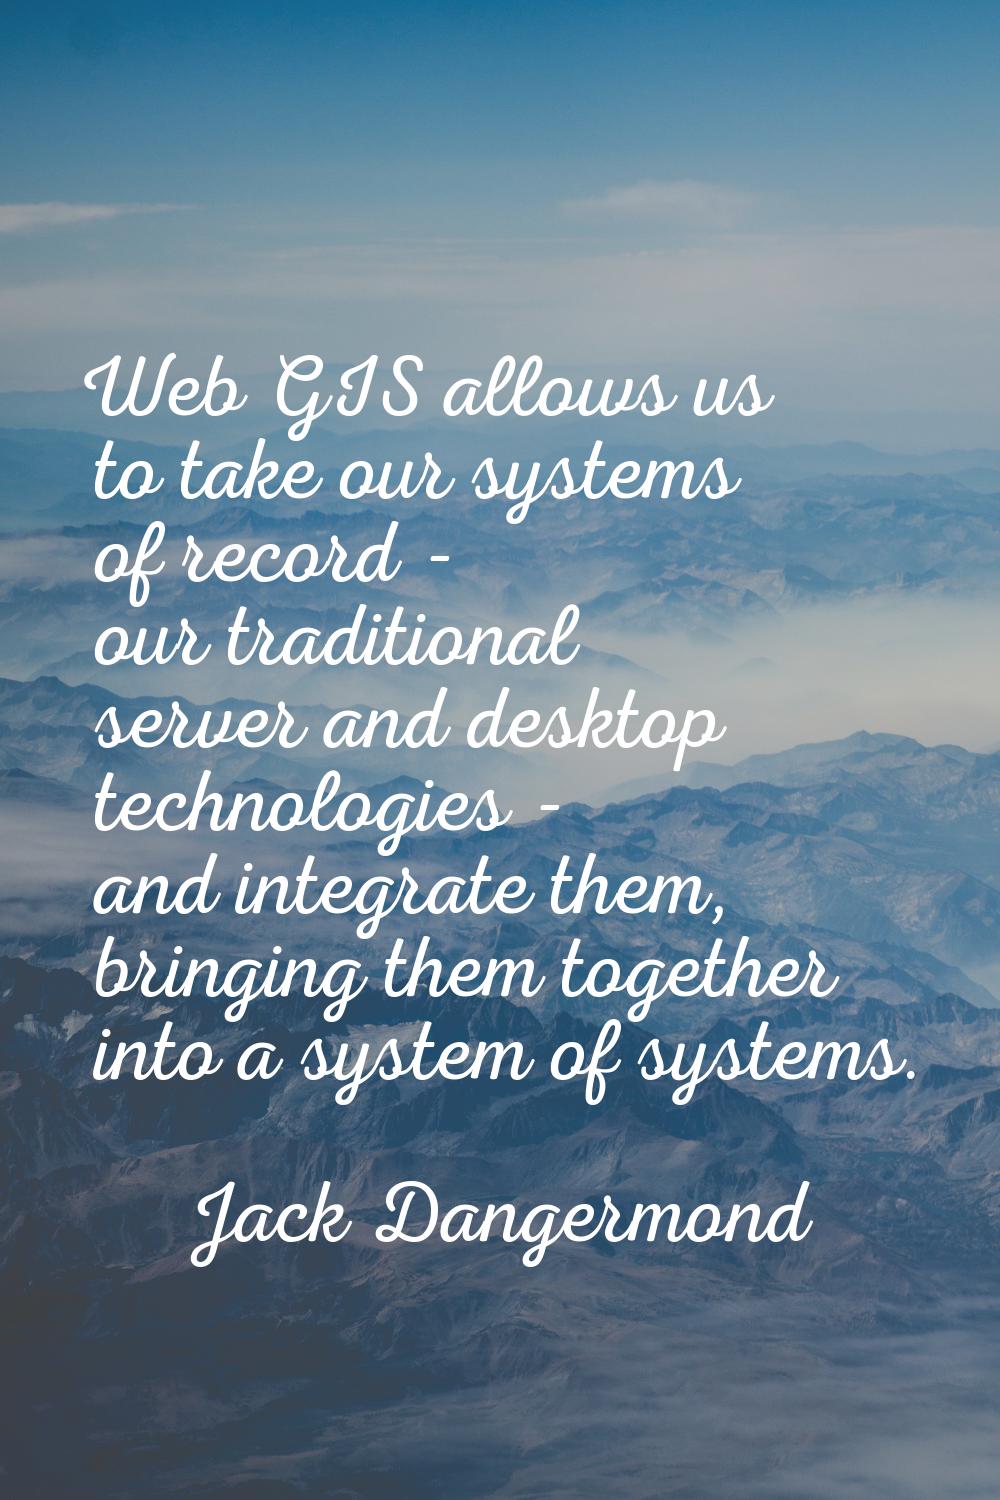 Web GIS allows us to take our systems of record - our traditional server and desktop technologies -